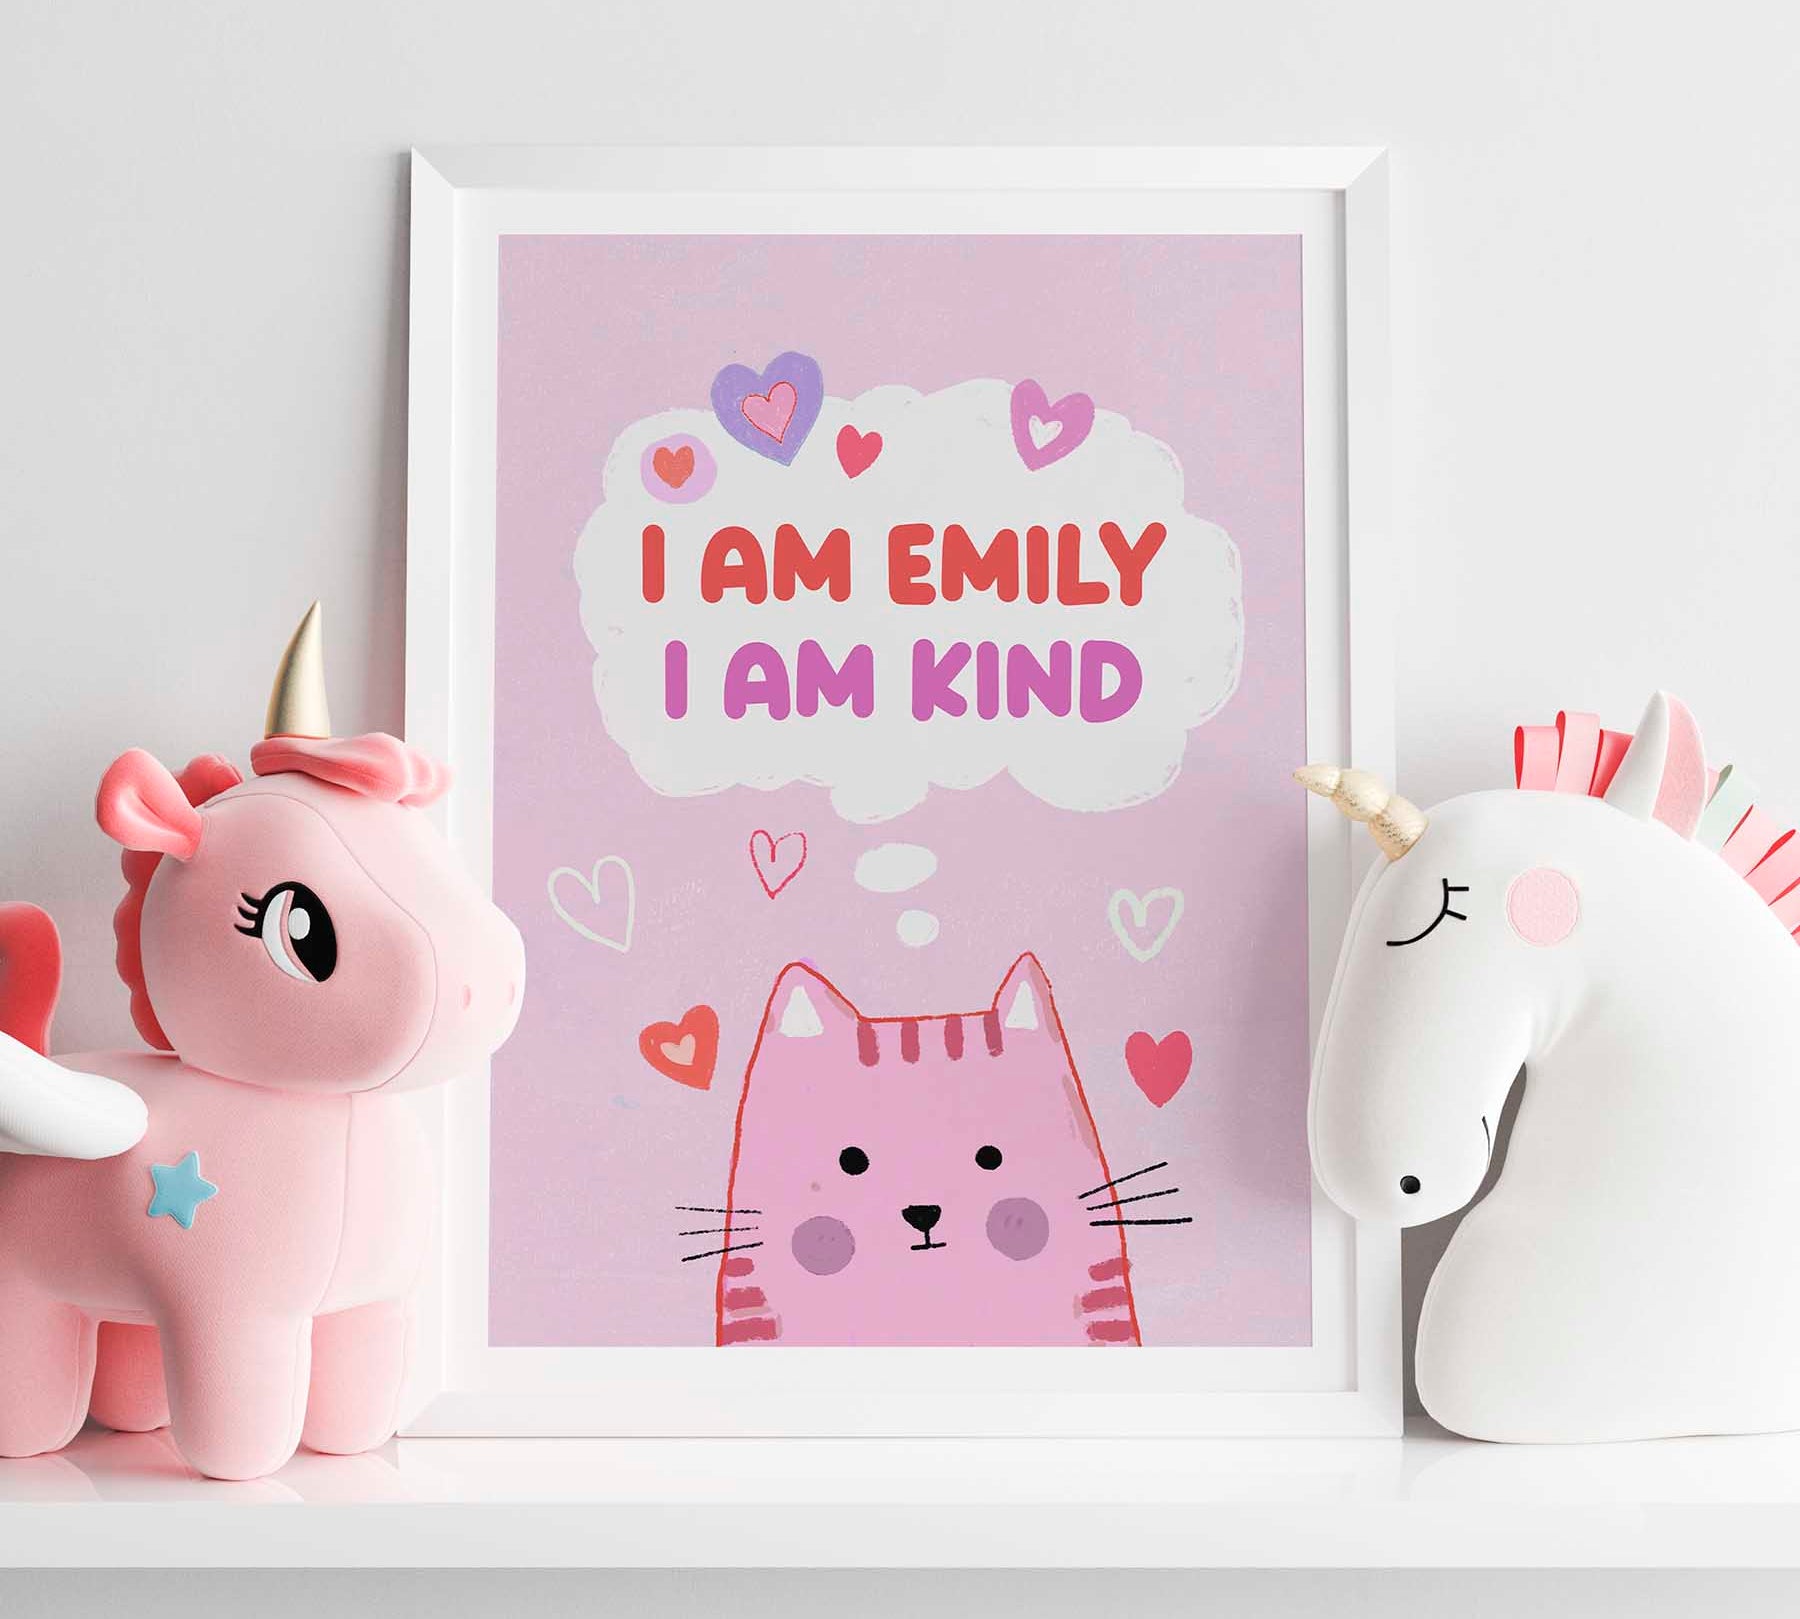 Customizable framed poster featuring a playful kitty, perfect for nursery wall art